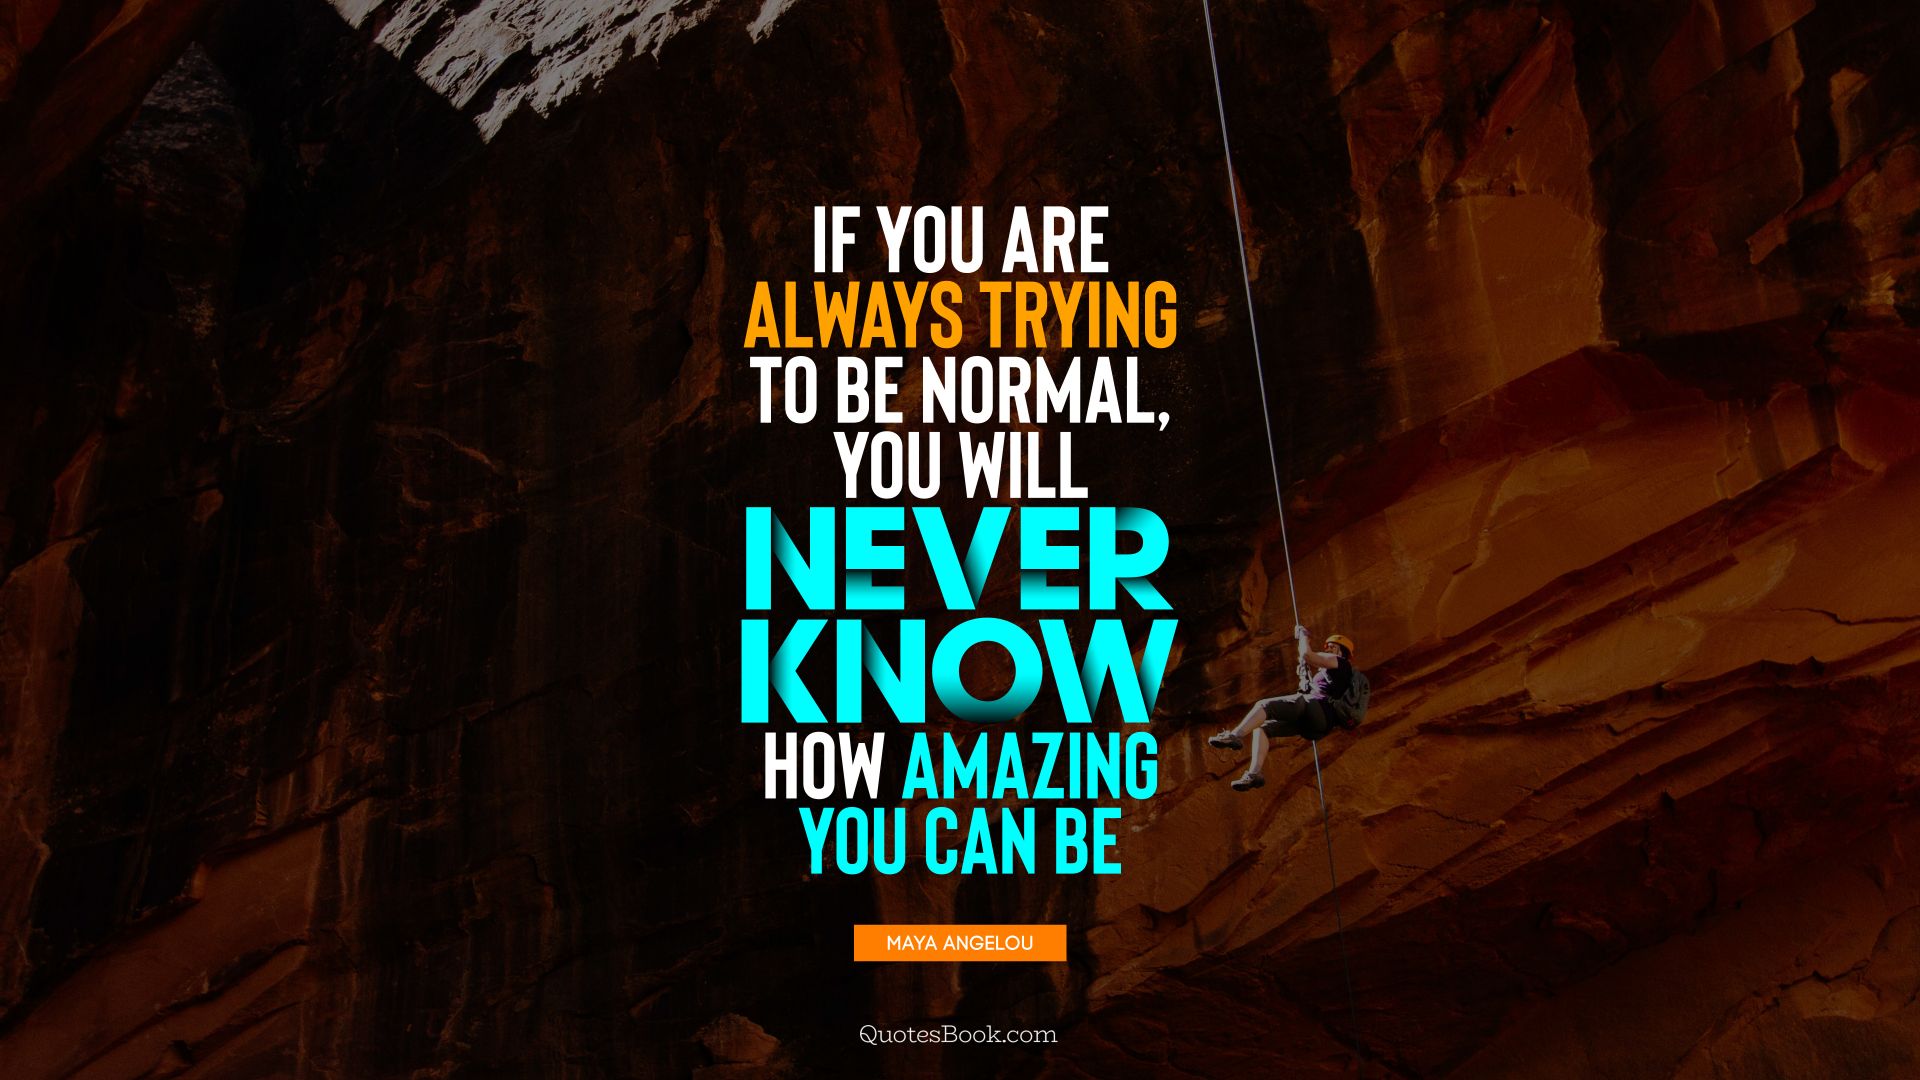 If you are always trying to be normal, you will never know how amazing you can be. - Quote by Maya Angelou